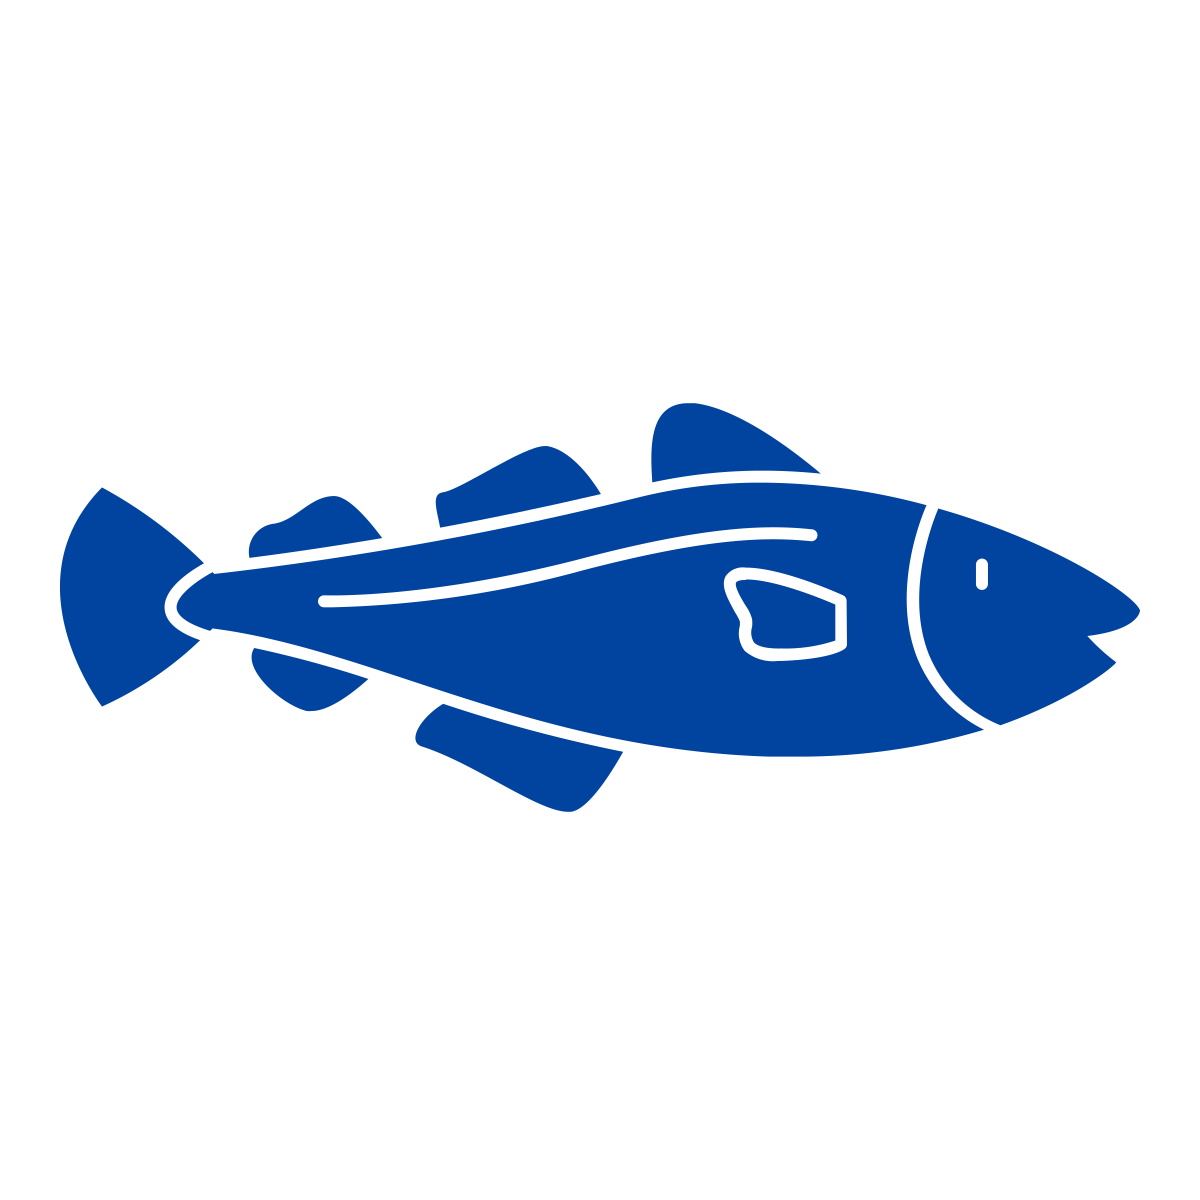 Blue icon of a codfish.